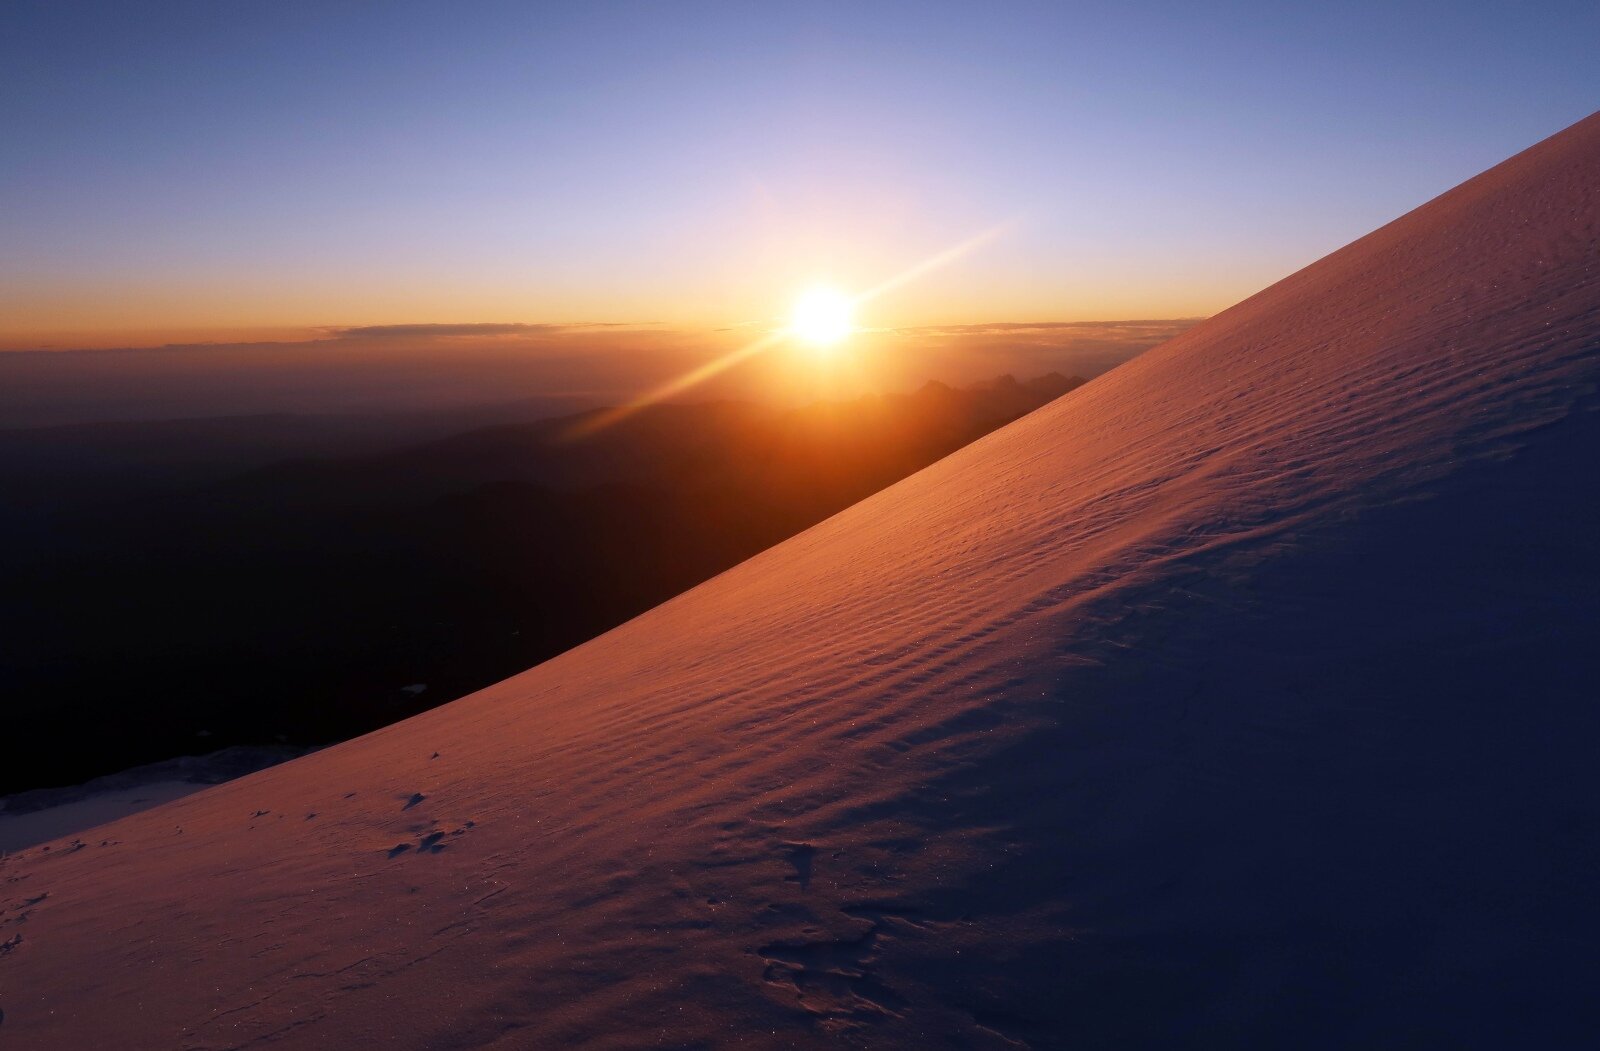 Sunrise at Lenz Rocks at 4500m during a summit push on Mount Elbrus. Although it was circa minus 20 Celsius (with windchill) when the photograph was taken, experiencing the rising sun in an environment like this is worth getting up at 12.30am for.